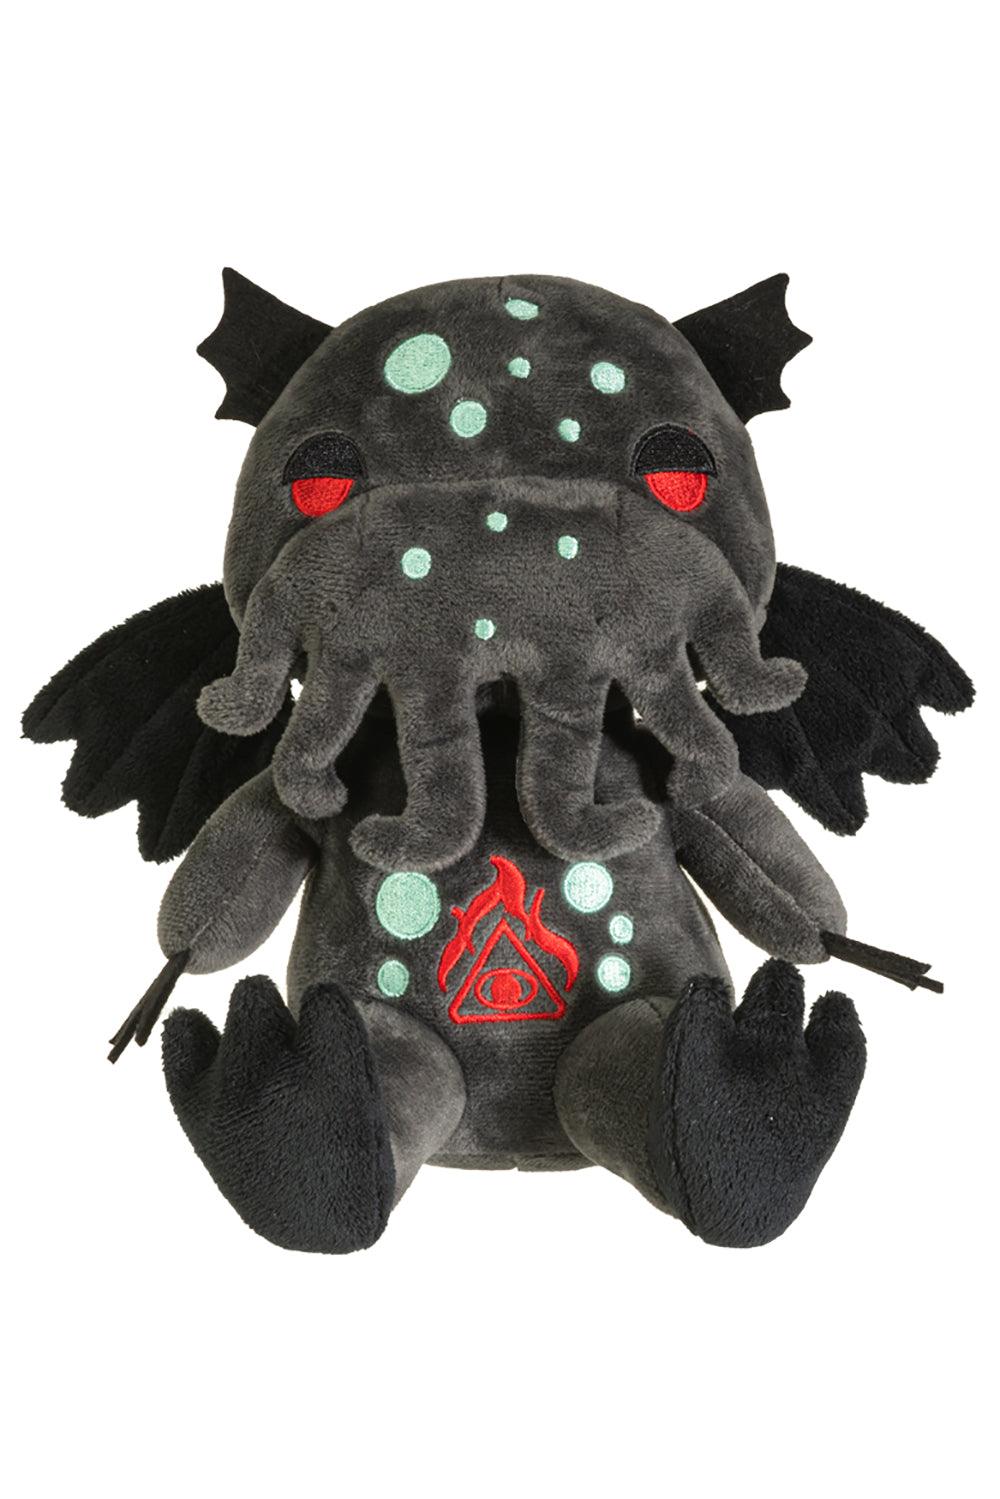 Pacific Giftware Cthulhu Plush Toy - VampireFreaks